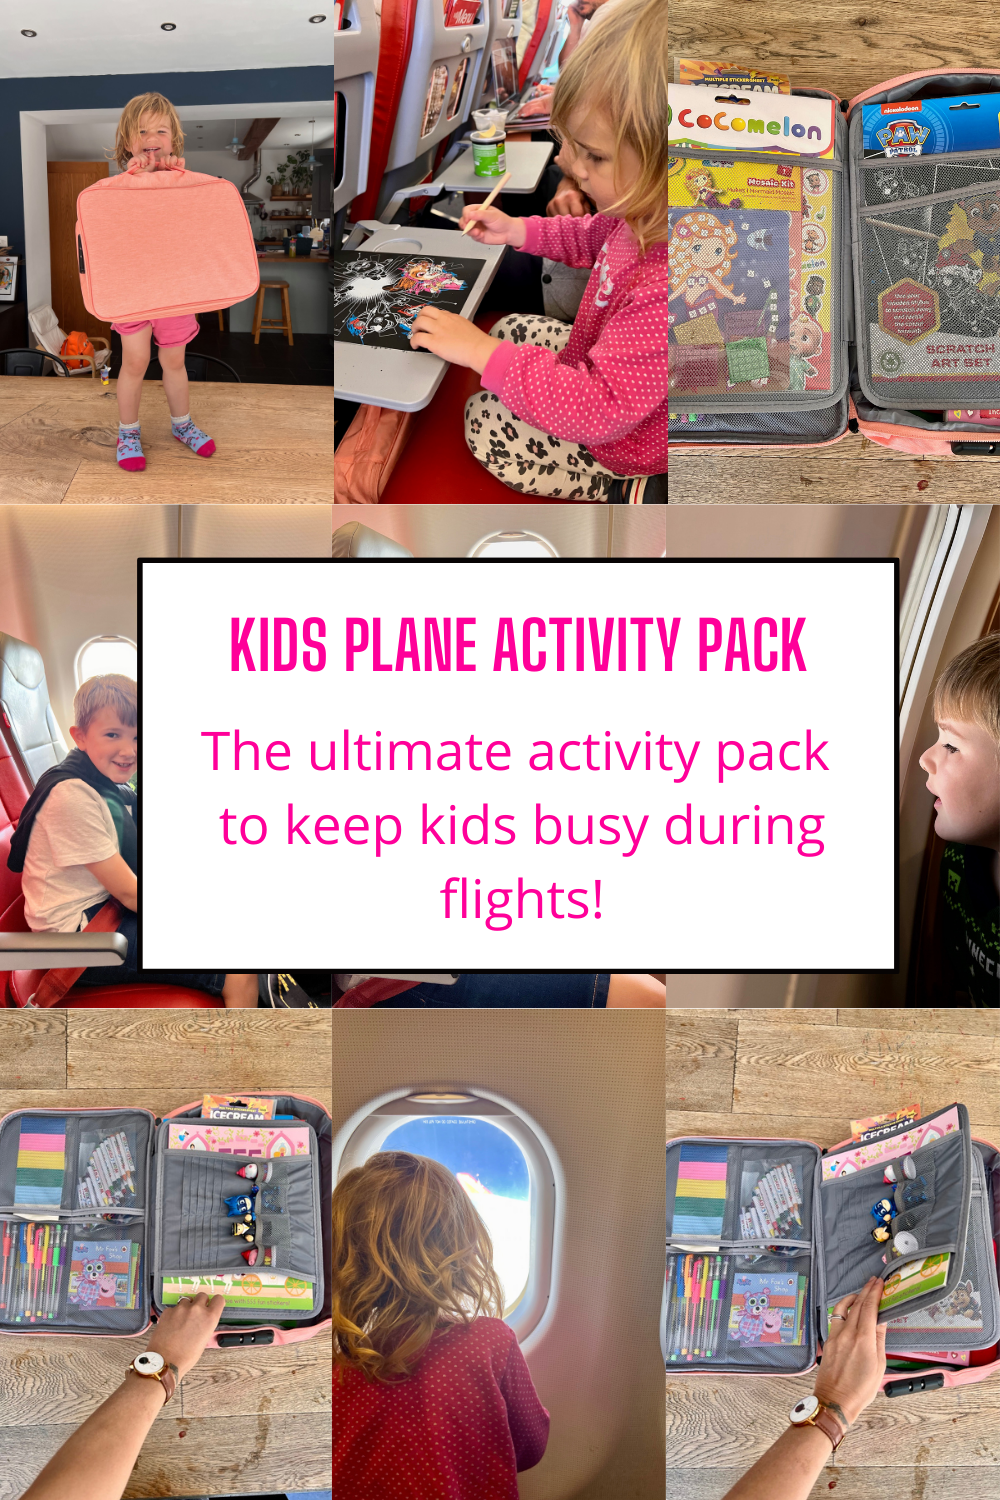  Kids Travel Activity Kit- Airplane Activities for Kids